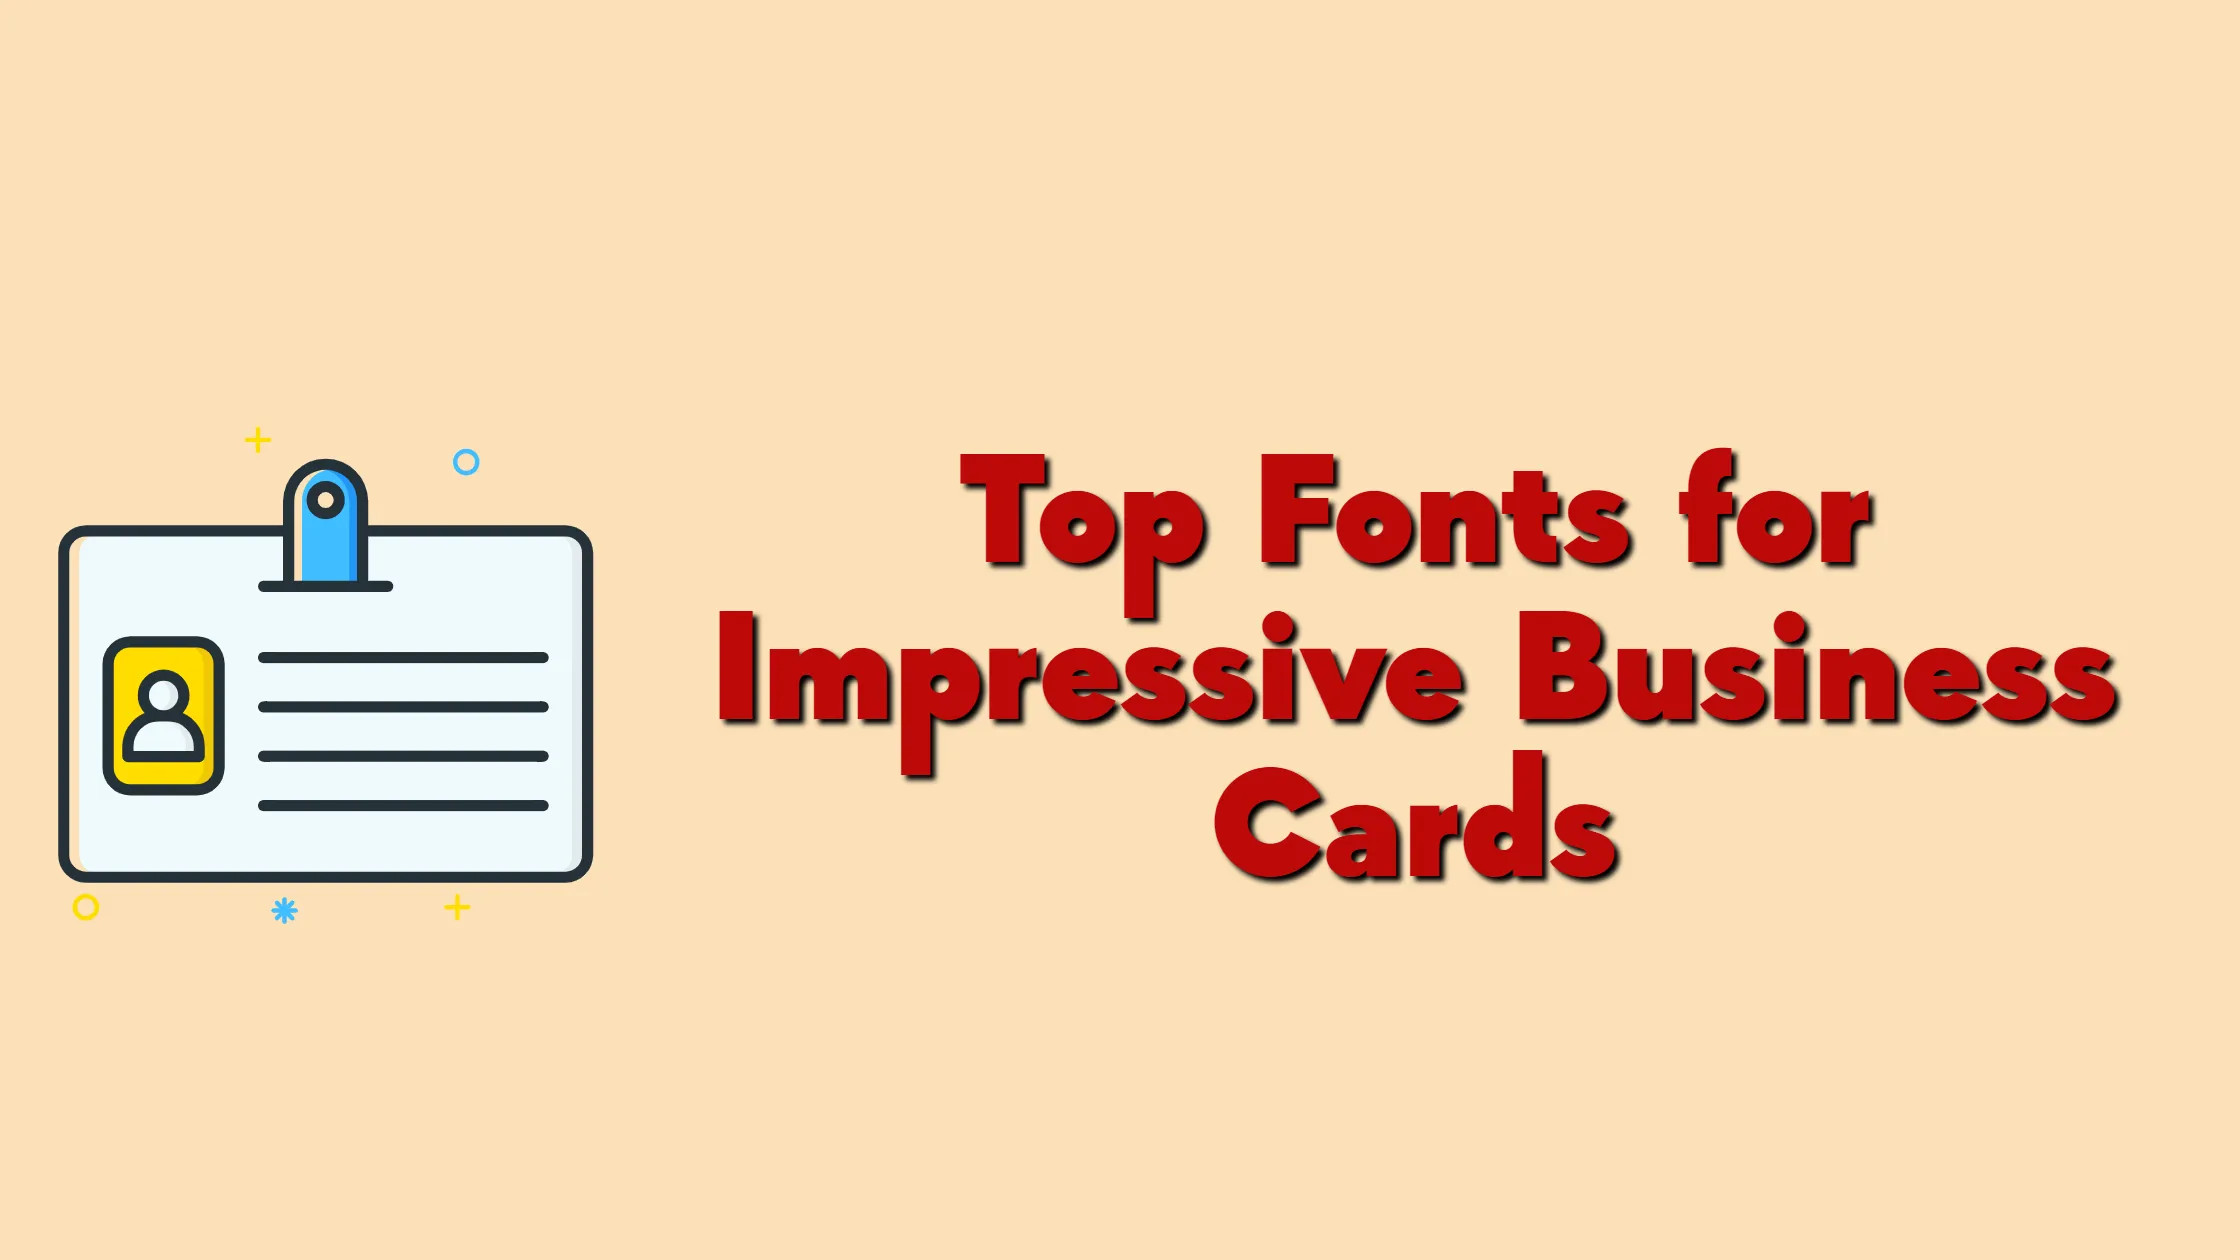 Revamp Your Branding: The Top Fonts for Impressive Business Cards